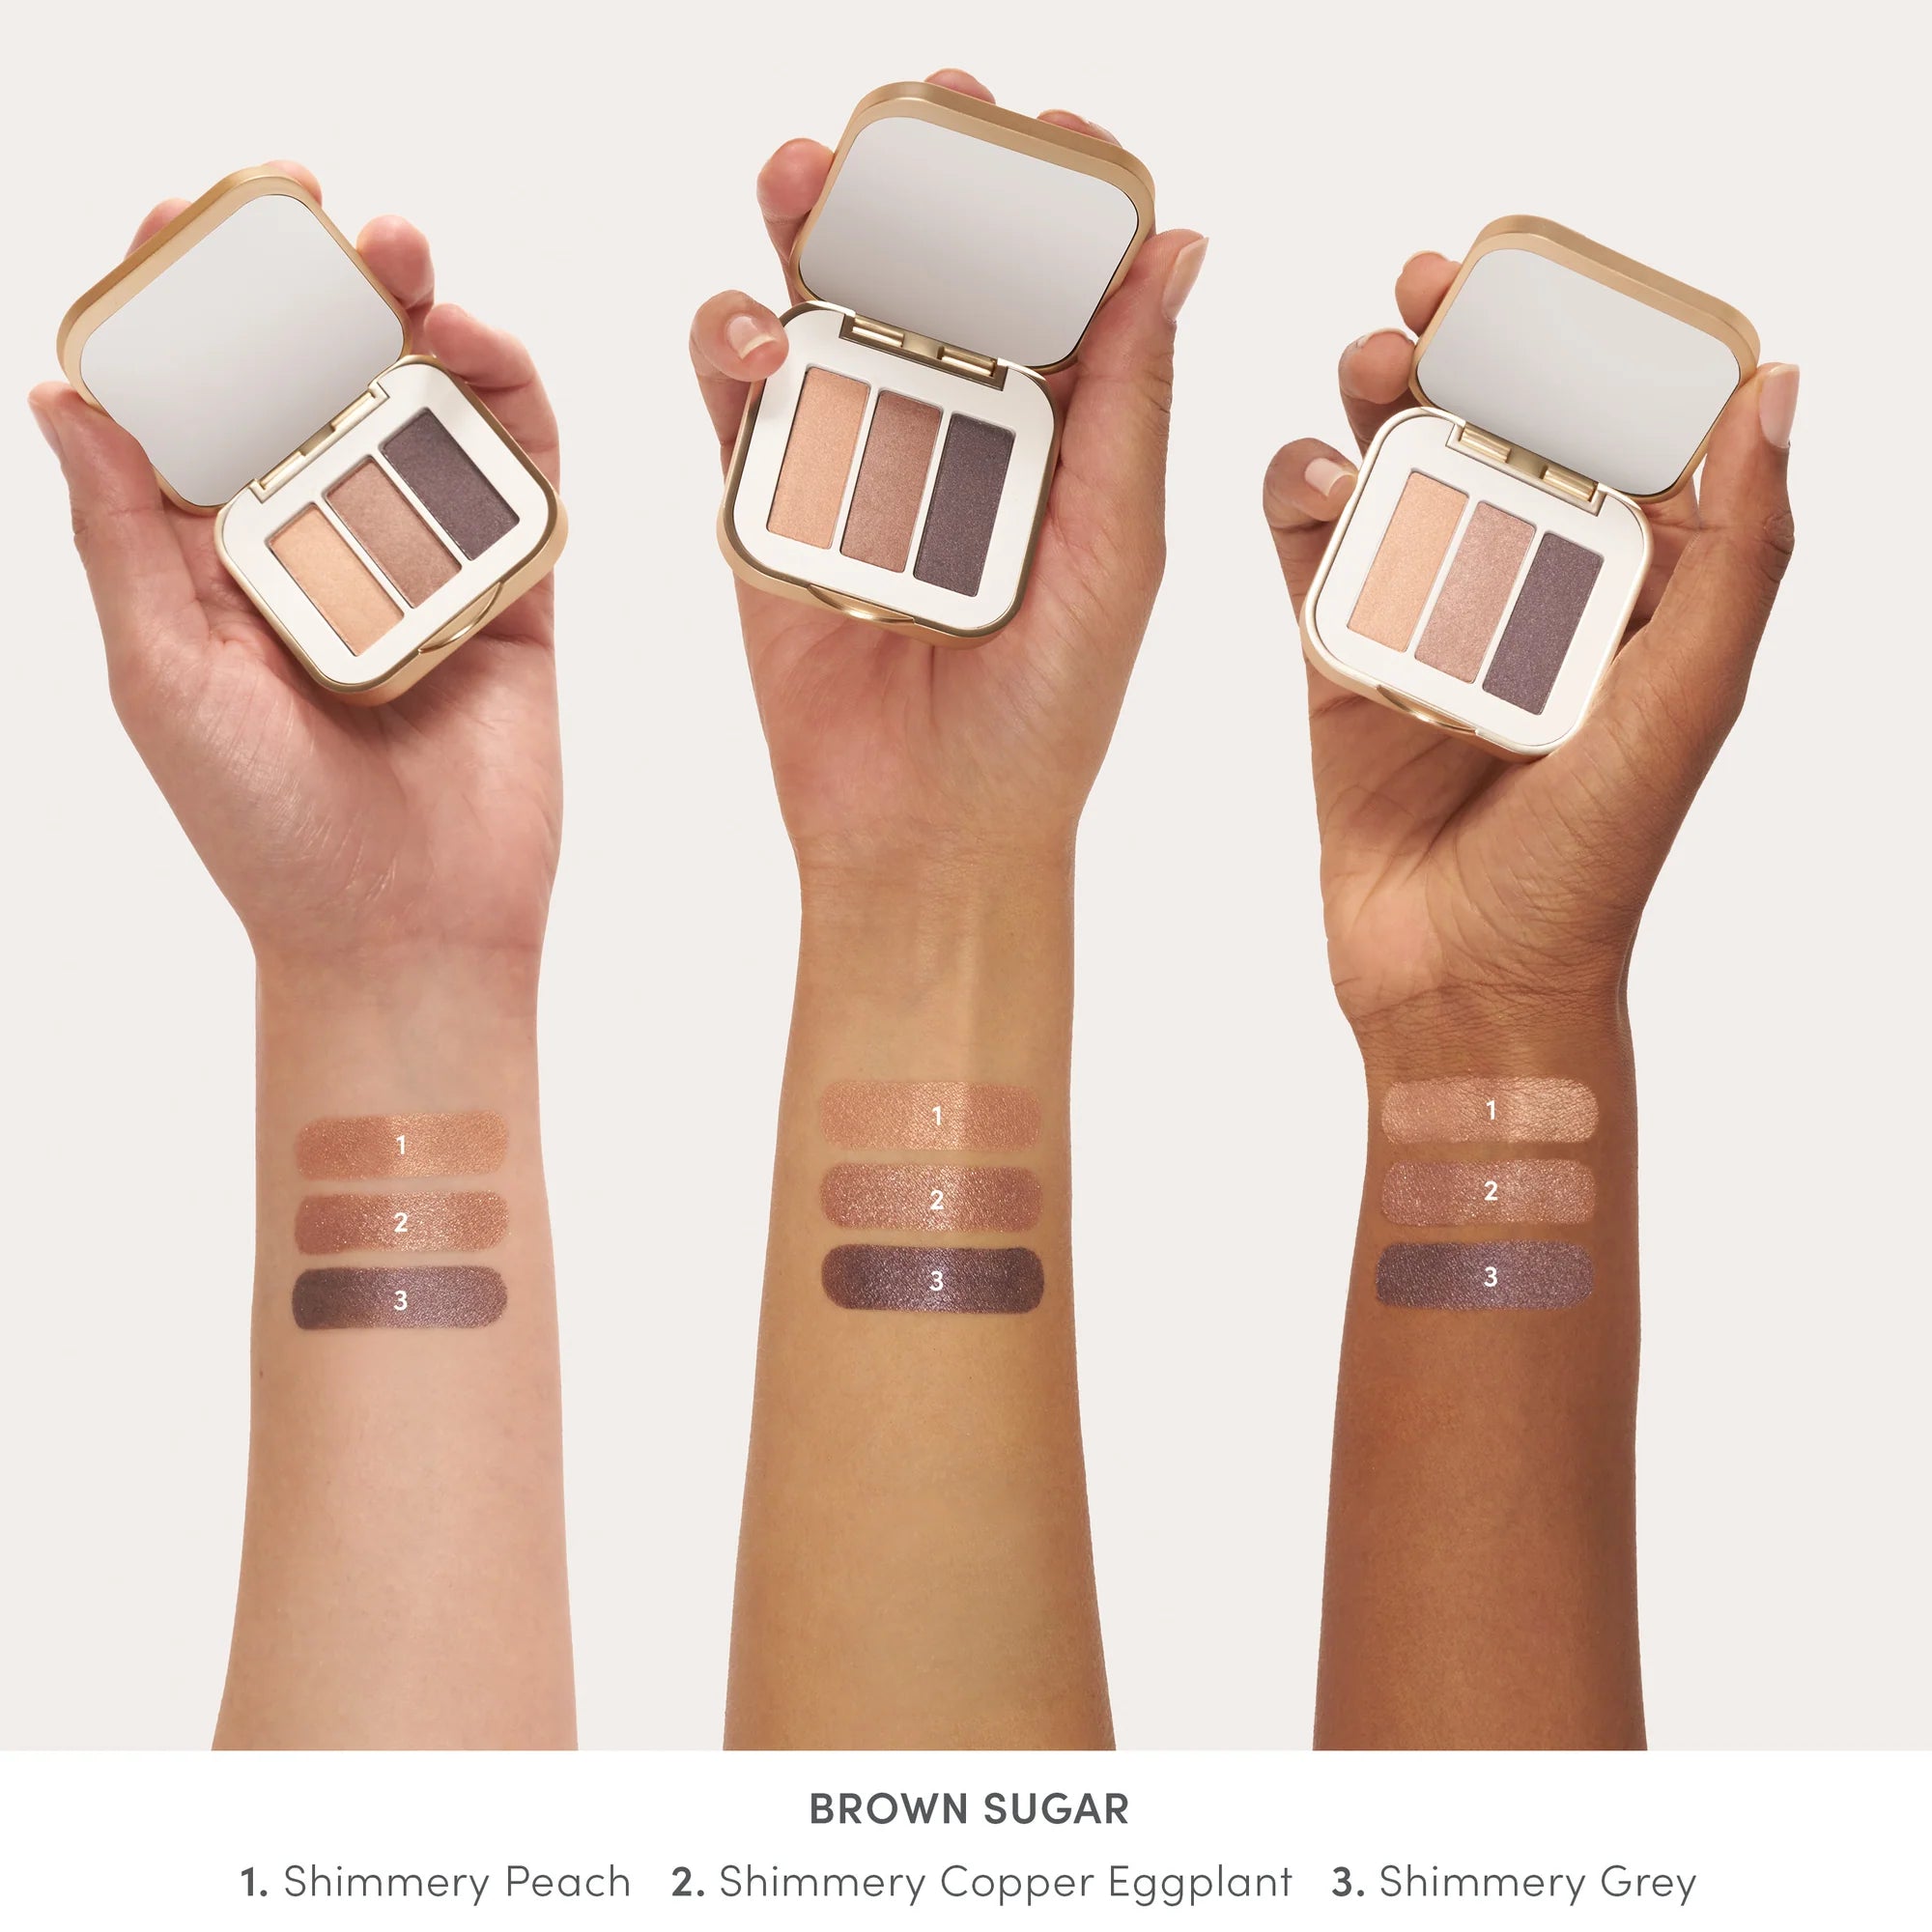 Jane Iredale's PurePressed® Eye Shadow Triple shade Brown Sugar - shimmery peach, shimmery copper eggplant, shimmery grey swatch